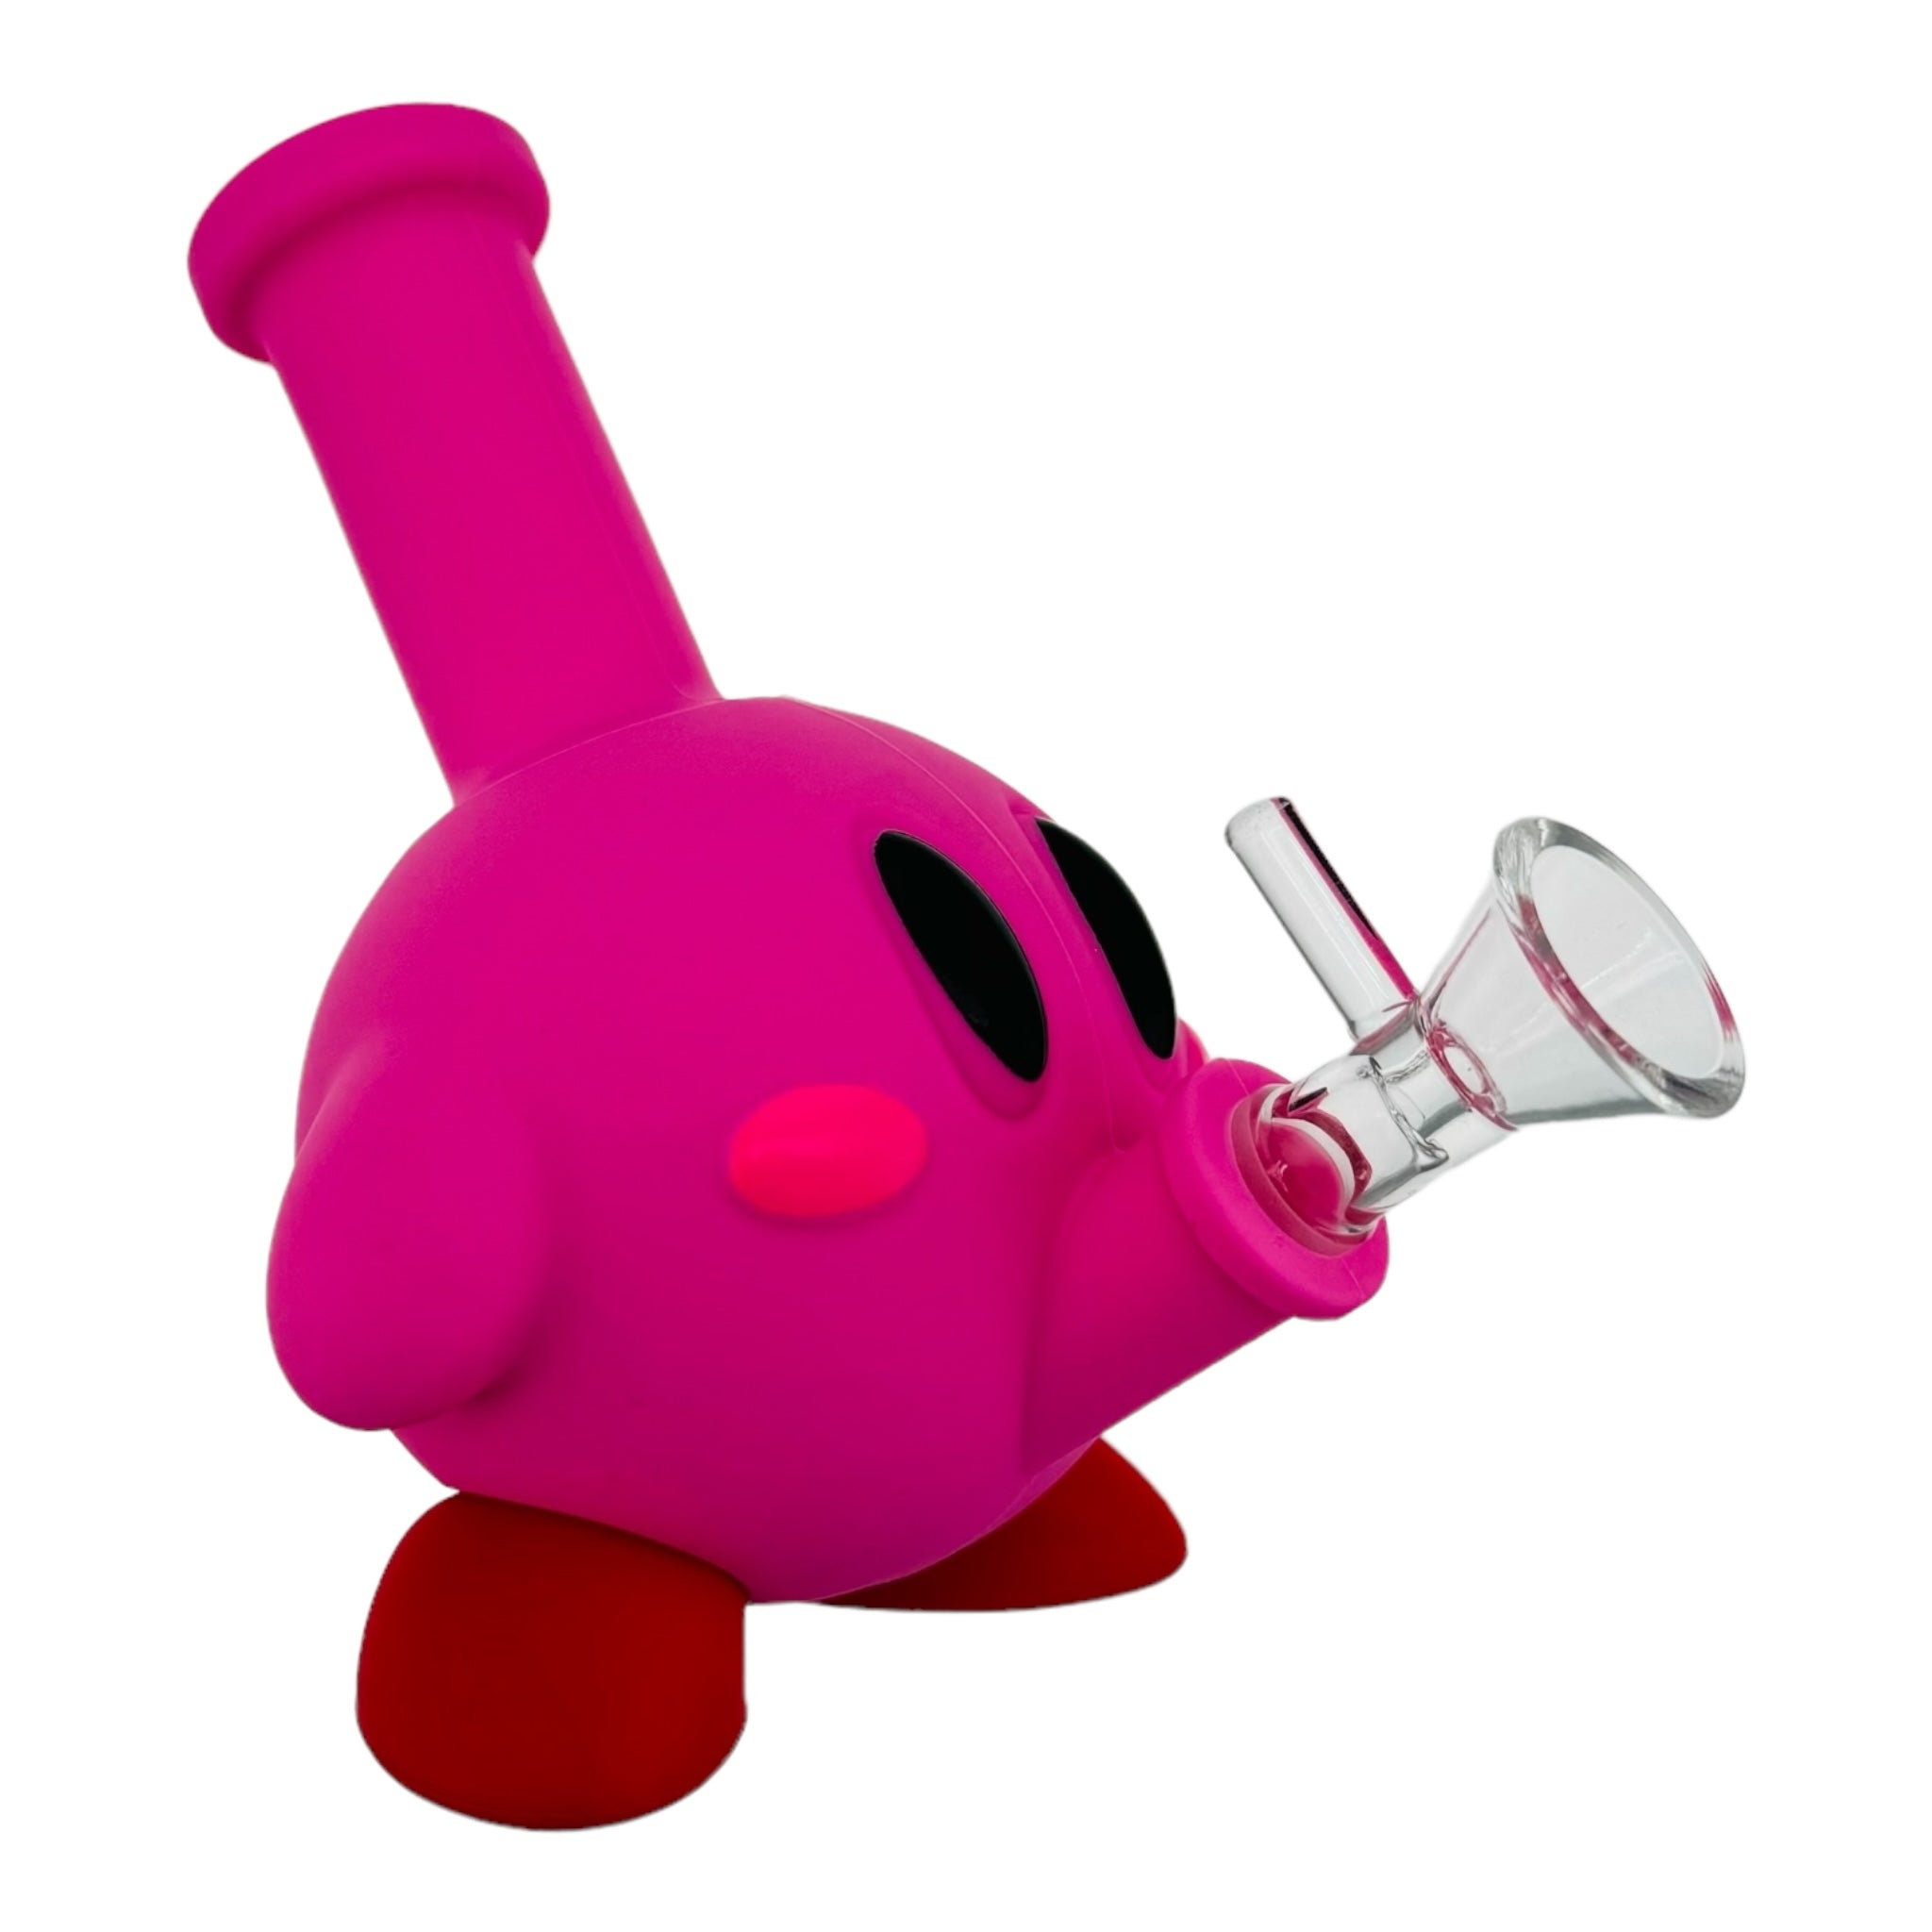 anime Kirby Silicone Rubber Bong for sale free shipping